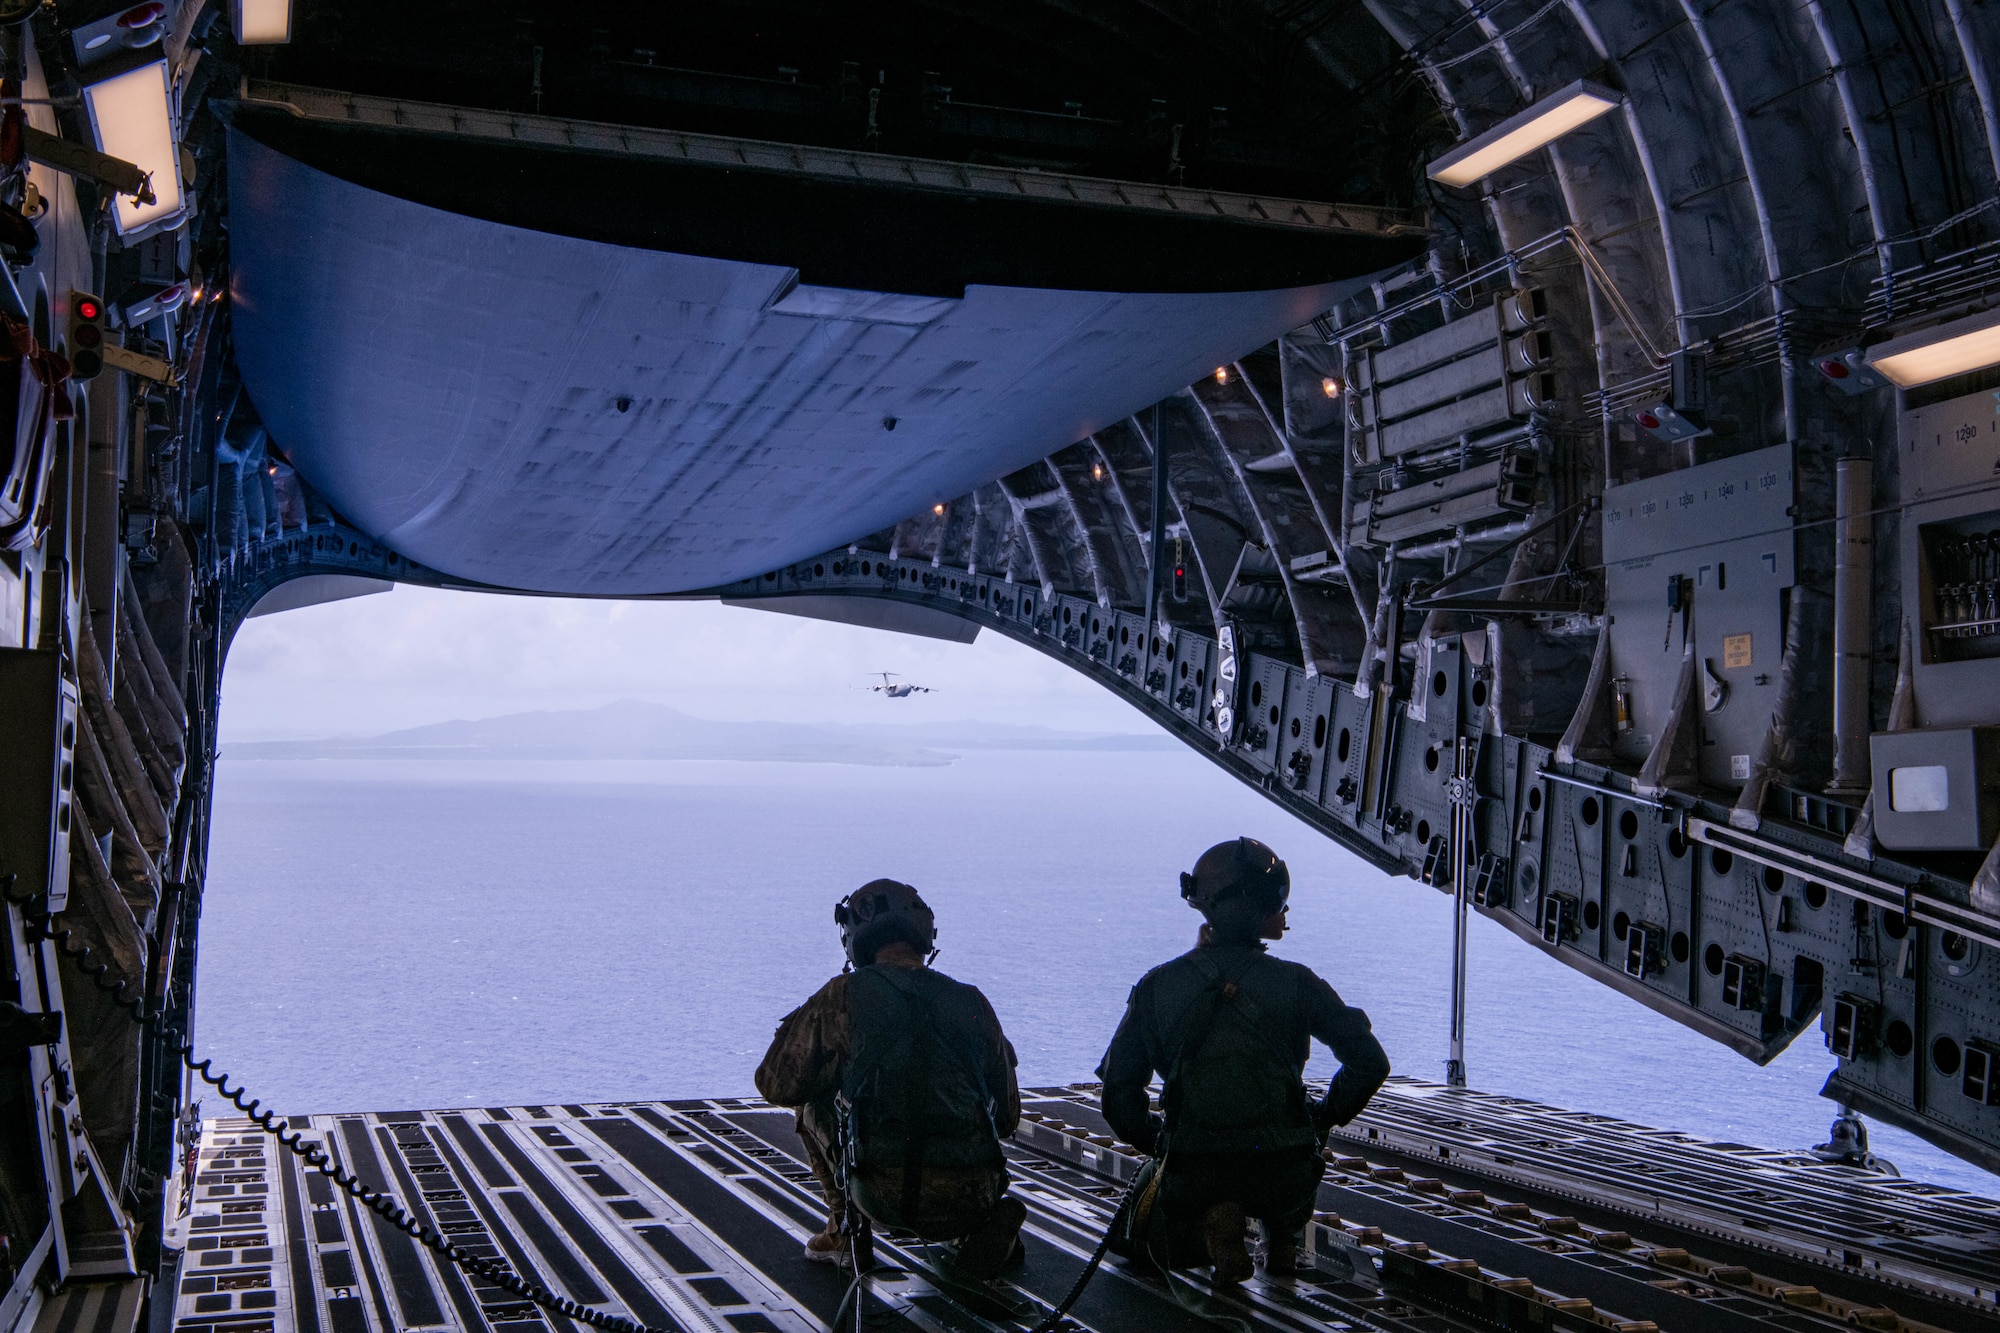 Coalition loadmasters look out over the Pacific Ocean from an Australian C-17 during a Joint airdrop
near Andersen Air Force Base, Guam on July 12, 2023. This airdrop was part of Mobility Guardian 23
and showed how Allies and partners are capable of resupplying remote areas. MG23 is a mobility
exercise held across a 3,000-mile area intended to deepen interoperability with U.S. Allies and
partners, bolstering the collective ability to support a free and open Indo-Pacific area. (U.S. Air Force
photo by A1C Caleb Parker)